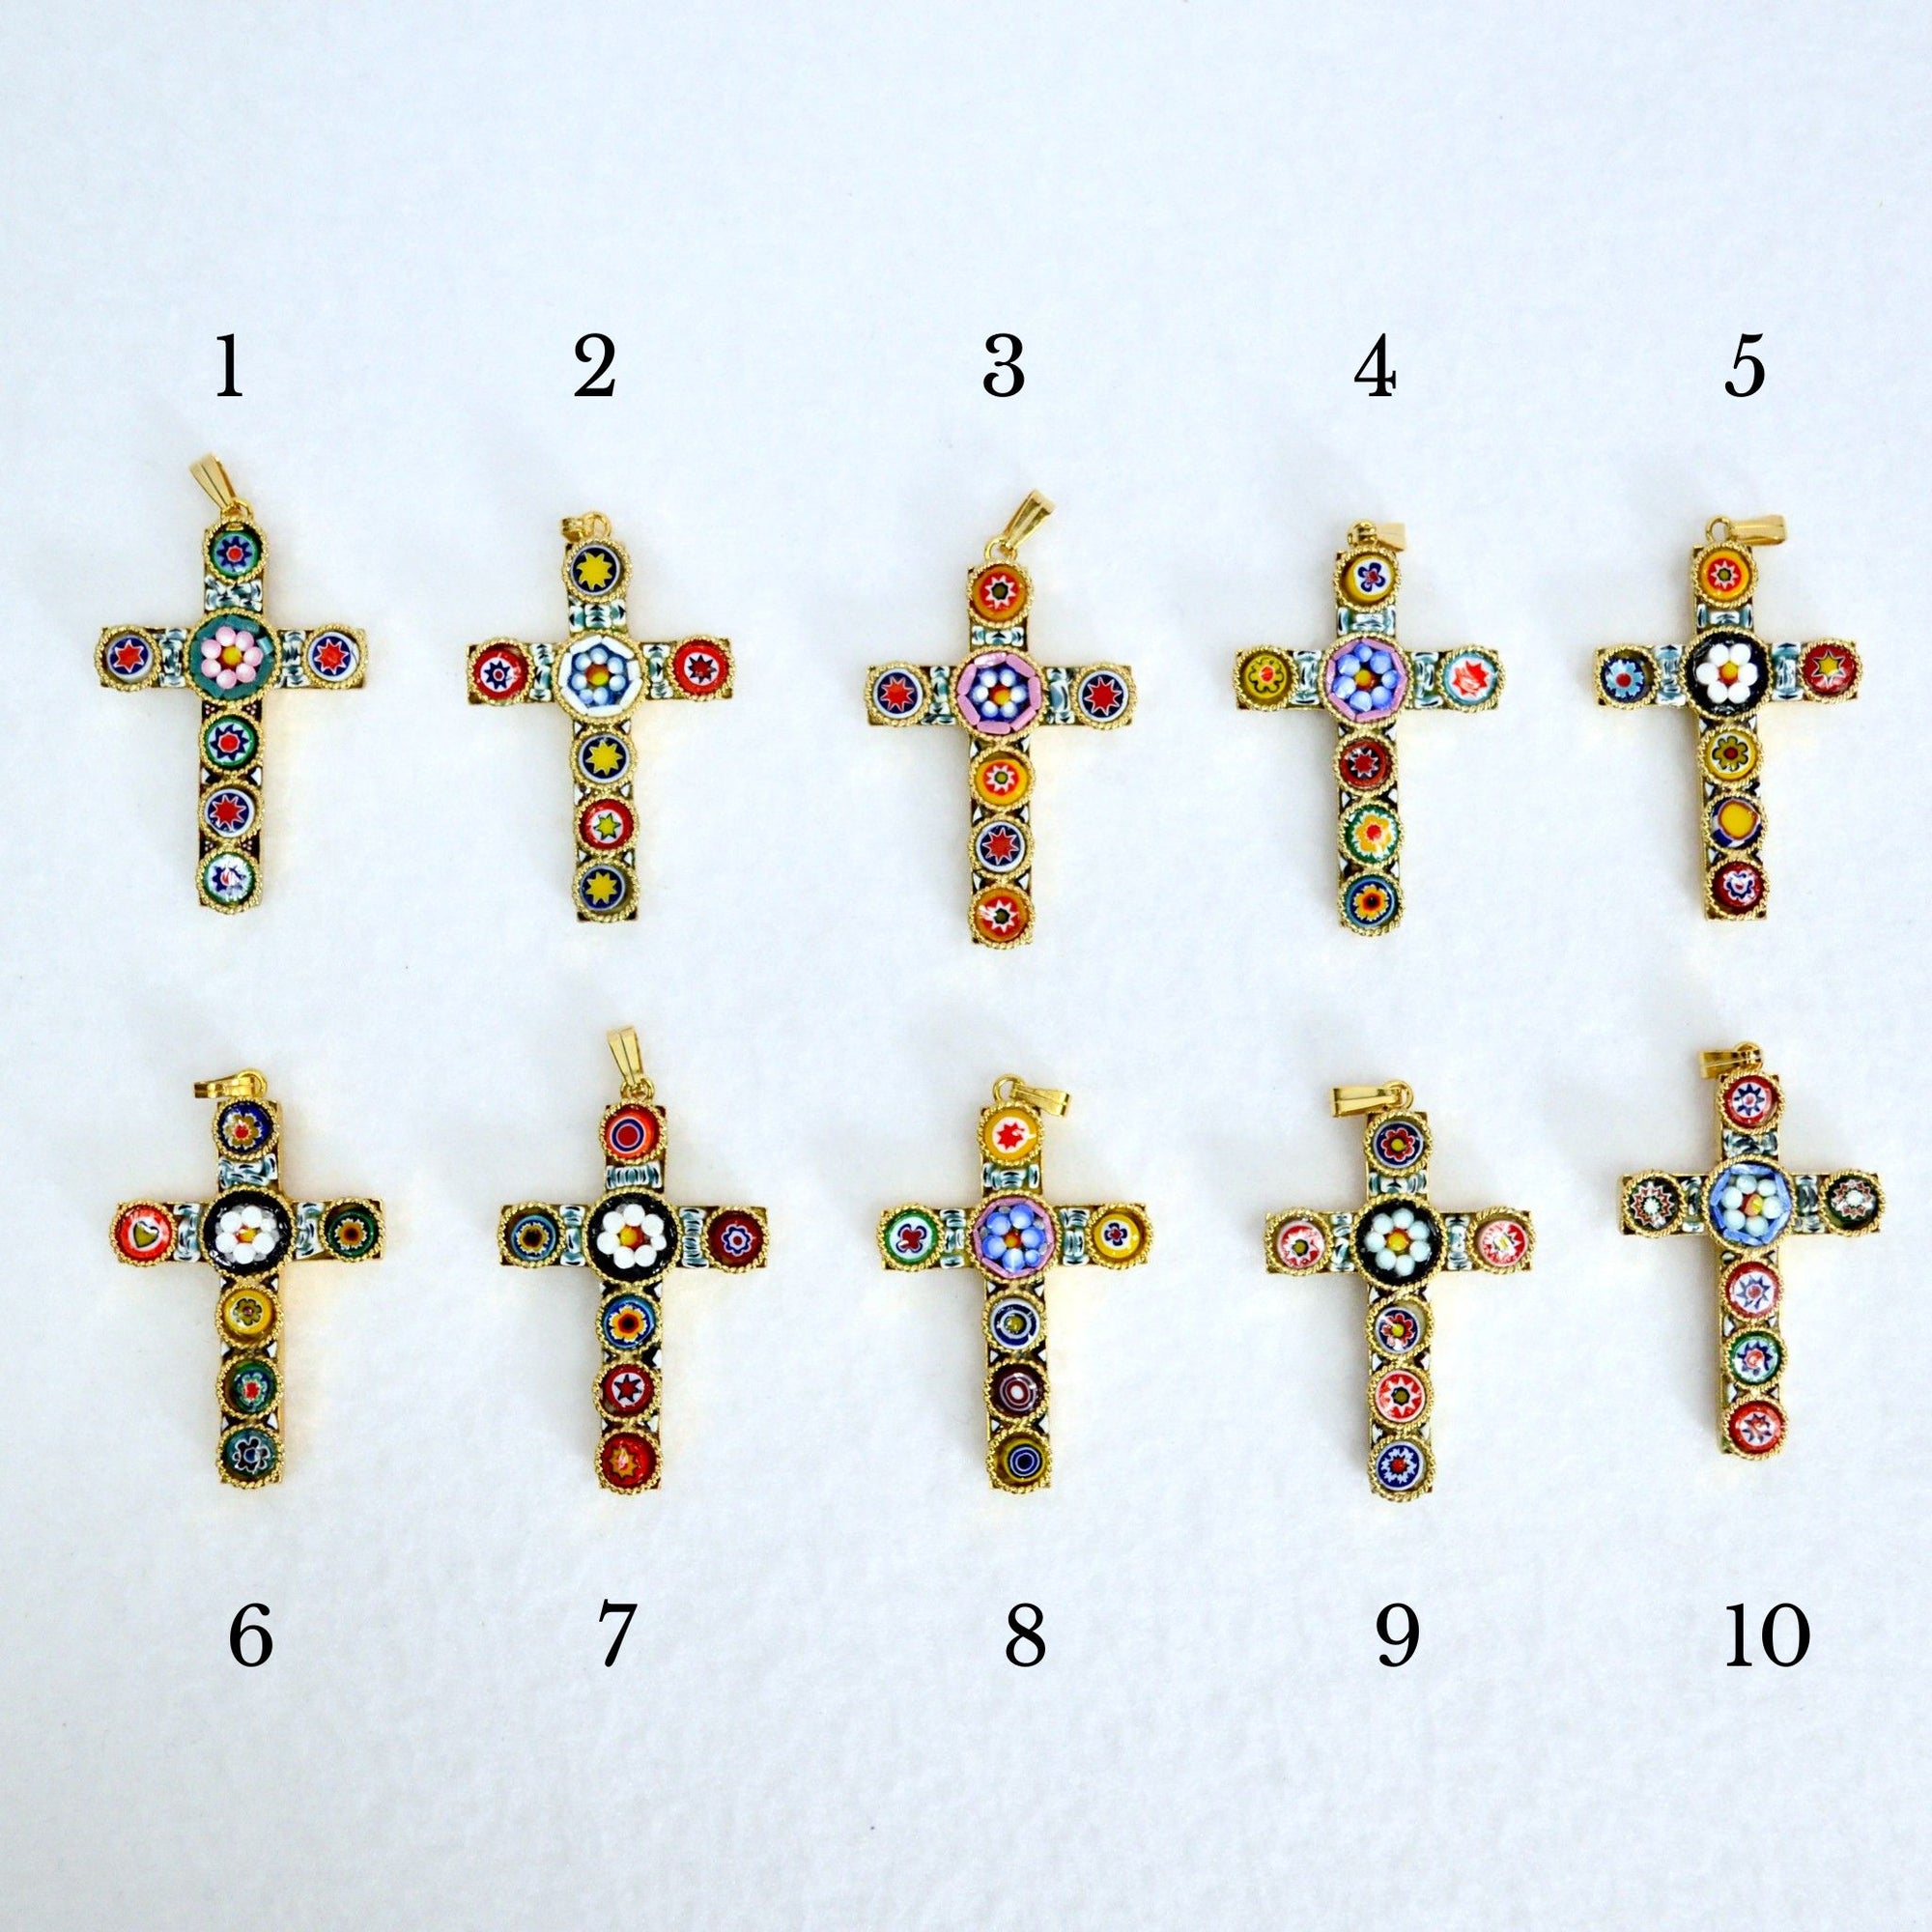 Florentine Mosaic Cross Pendant Necklace, Small, Made In Italy - My Italian Decor